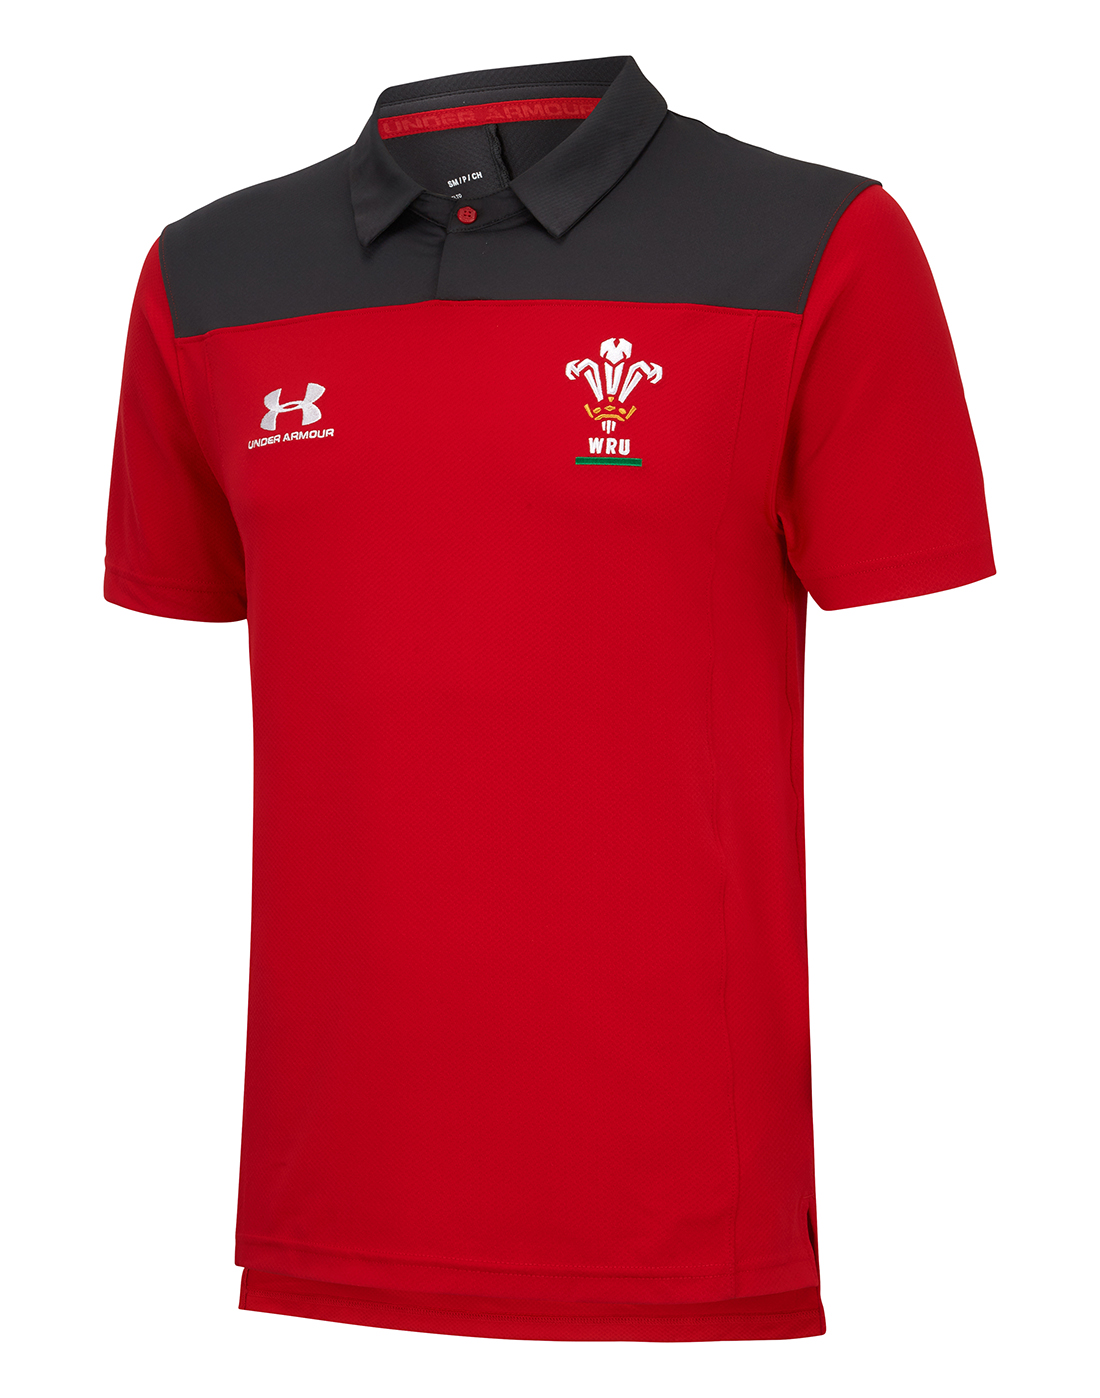 Under Armour Wales Rugby Team Polo Shirt 